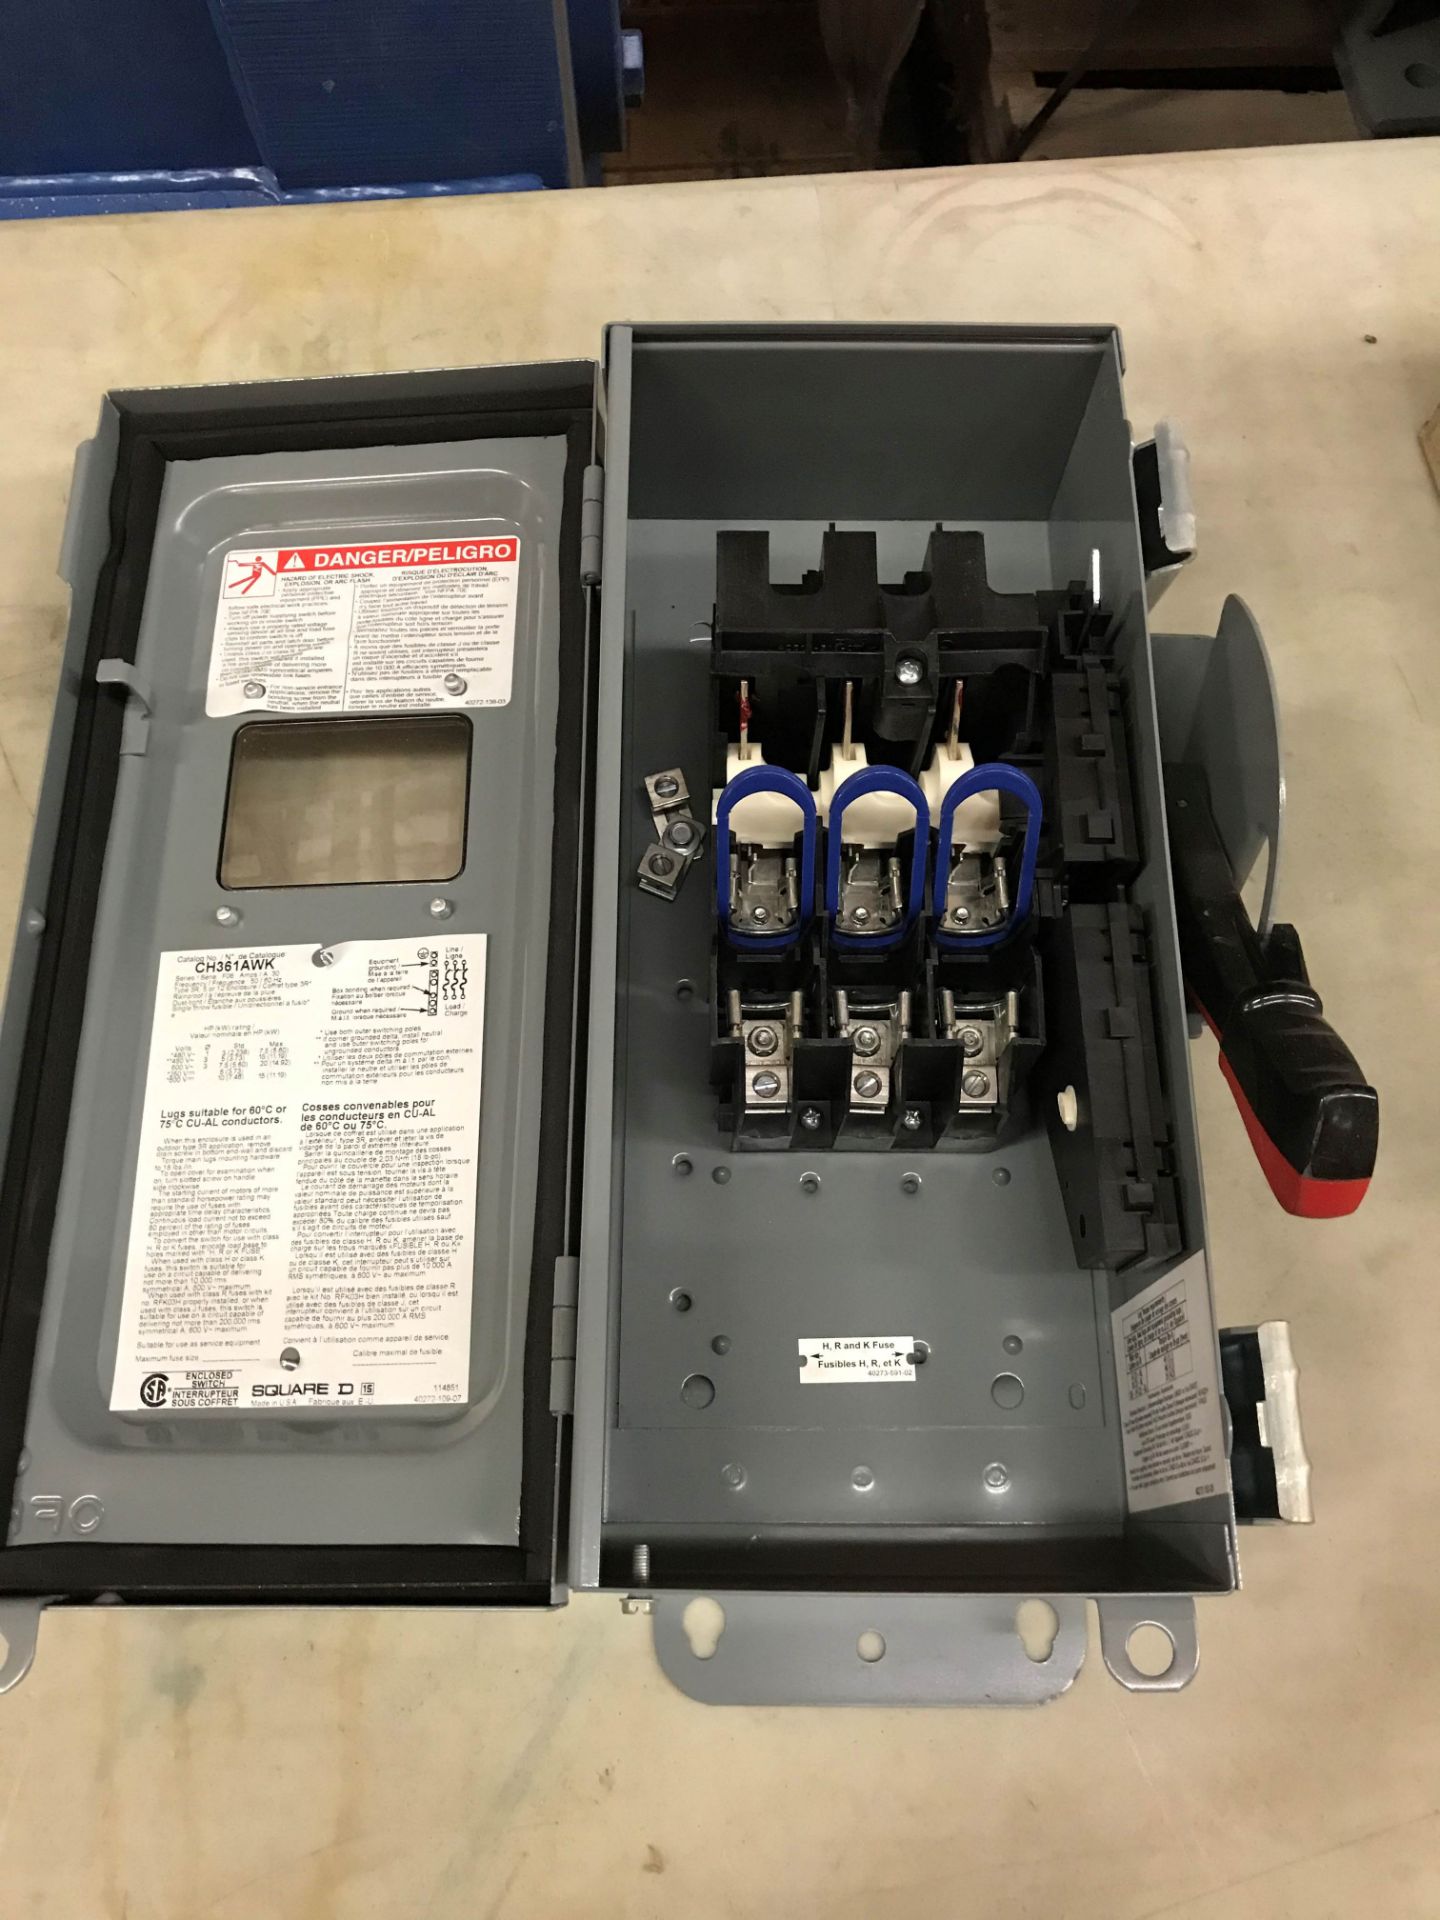 LOT/ SKID WITH ELECTRICAL & INSTRUMENTATION COMPONENTS - INCLUDING PUSH BUTTON STARTERS, SENSORS, - Image 29 of 29